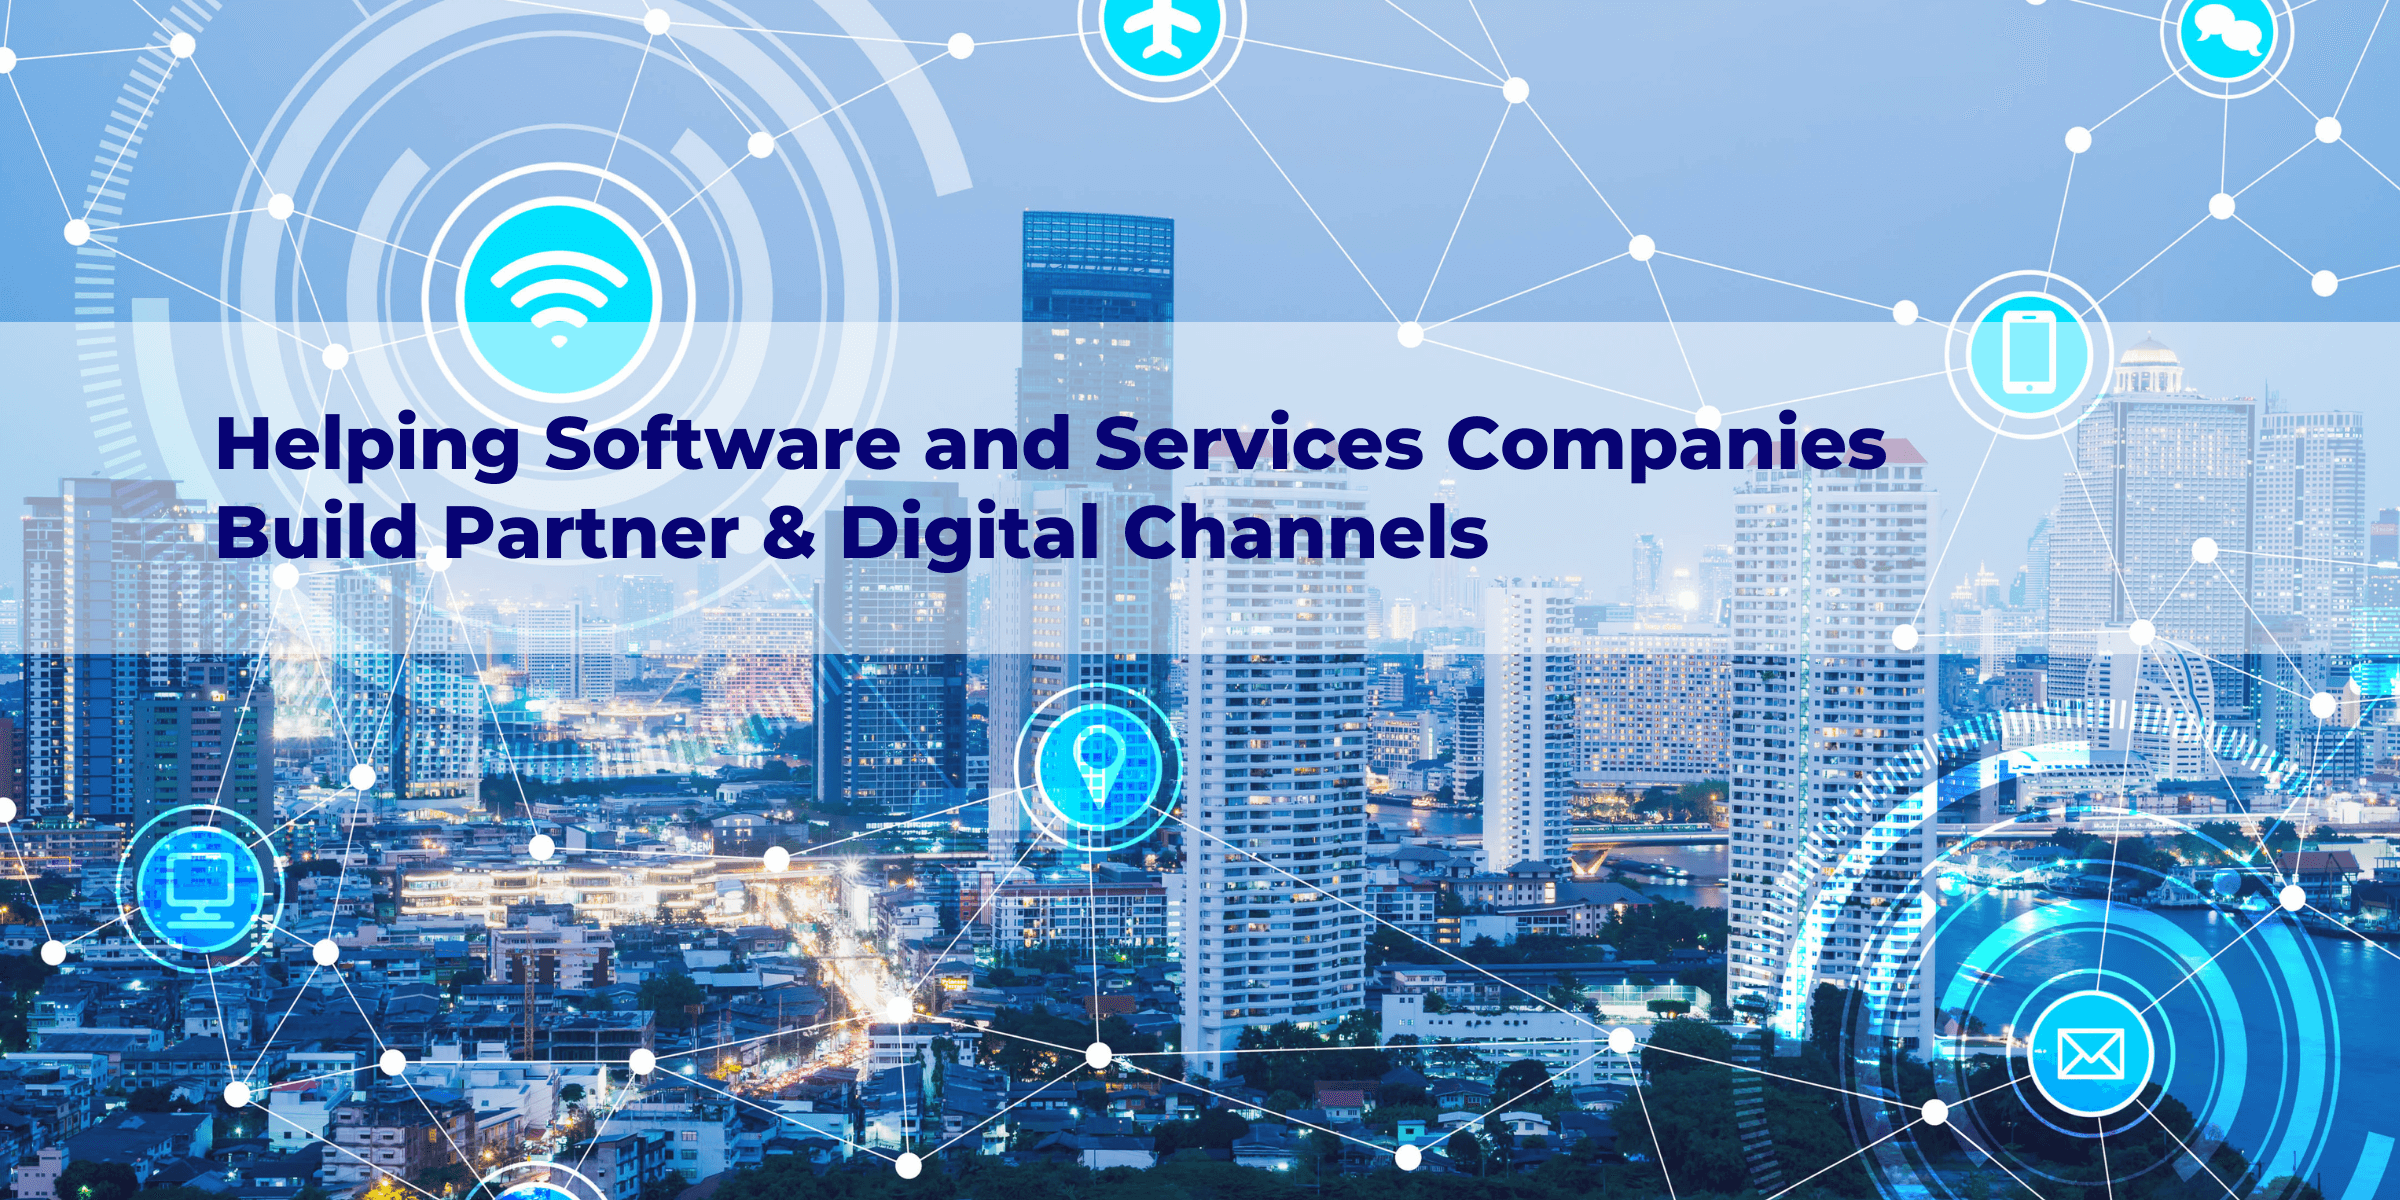 Helping Software and Services Companies Build Partner & Digital Channels